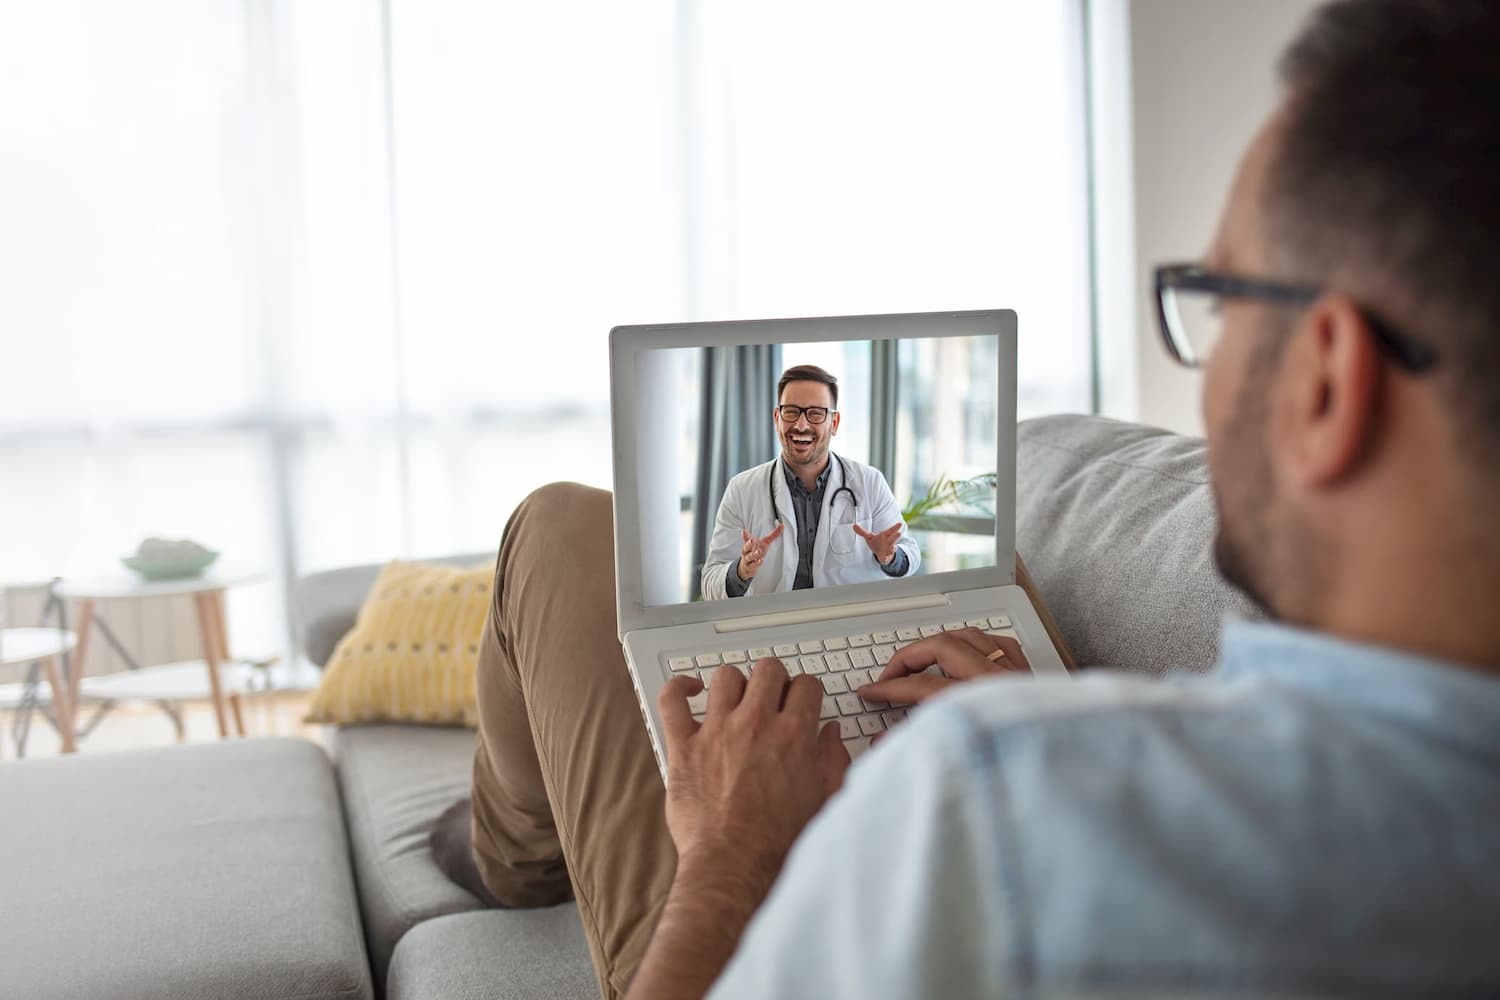 Virtual conversation with doctor